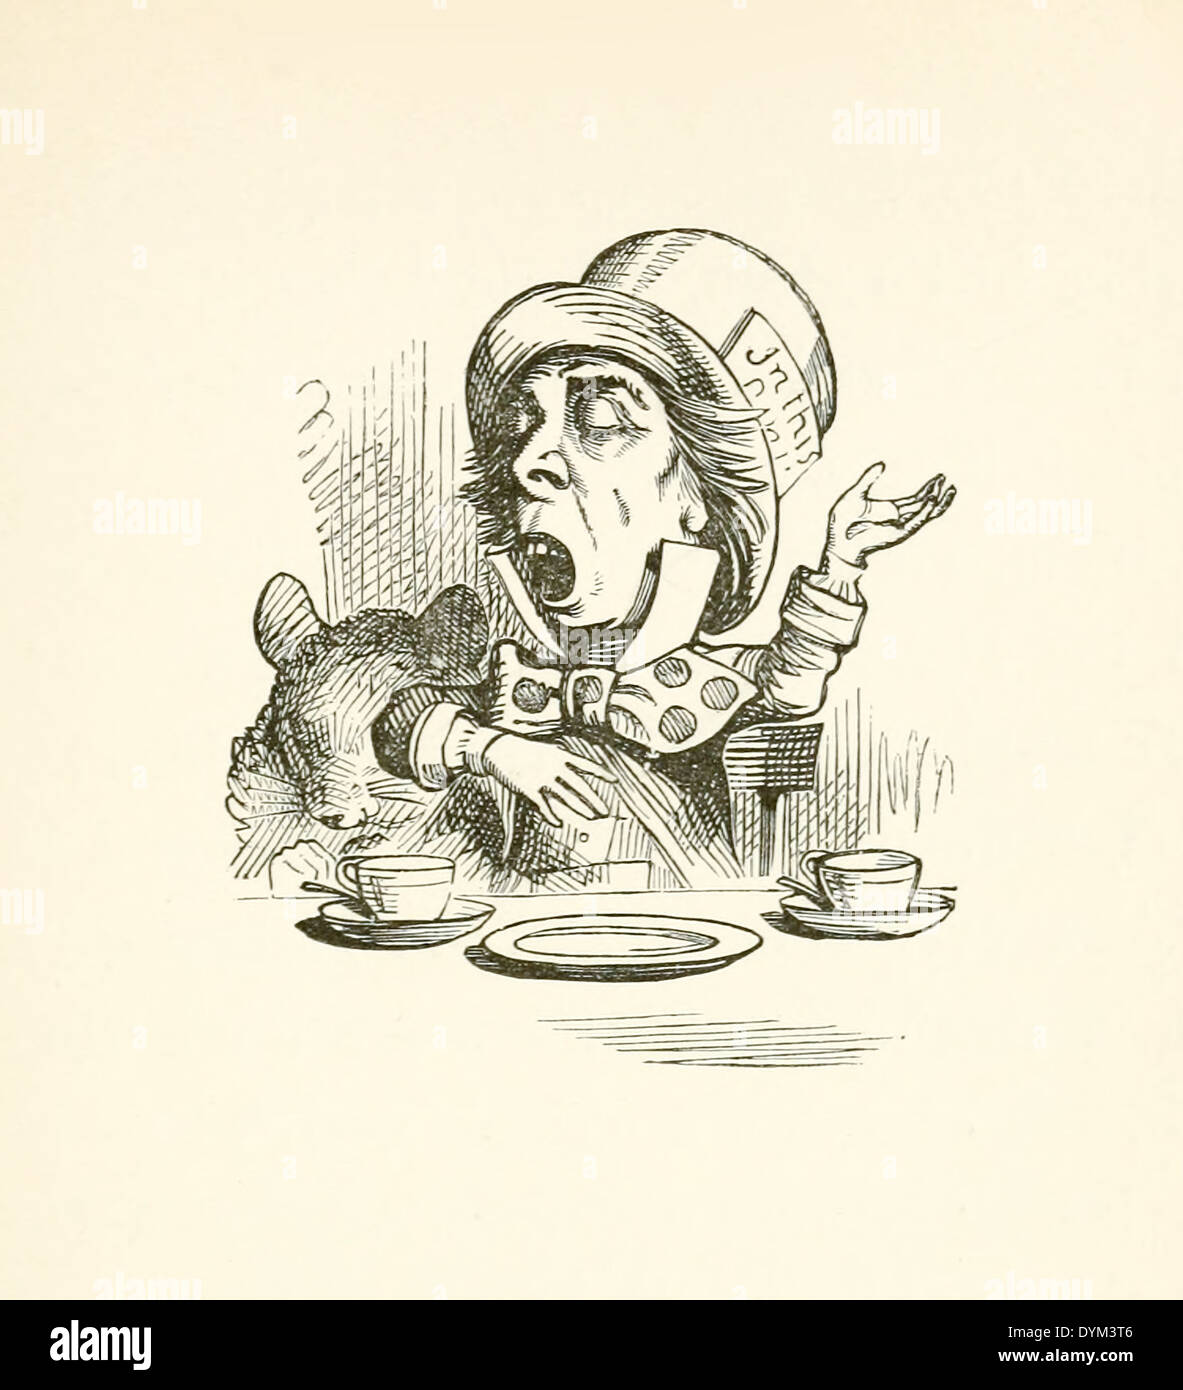 John Tenniel  (1820-1914) illustration from Lewis Carroll's 'Alice in Wonderland' published in 1865. Hatter and Dormouse Stock Photo